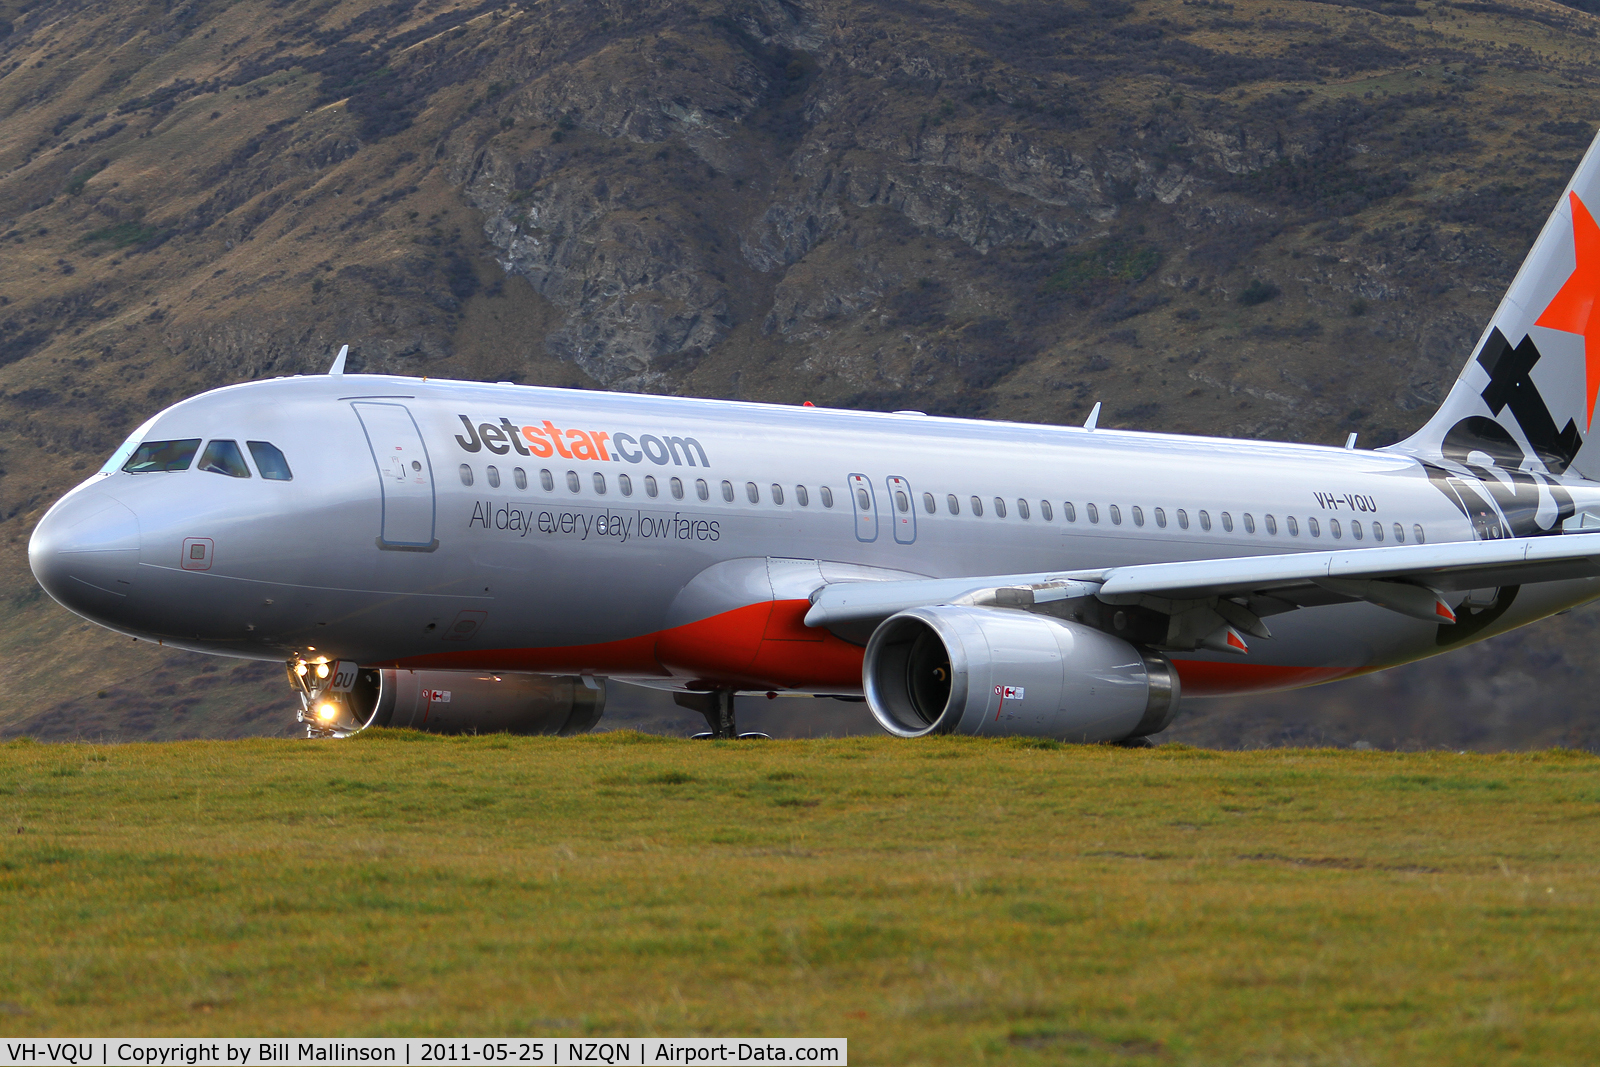 VH-VQU, 2005 Airbus A320-232 C/N 2455, at the end of an elevate 05